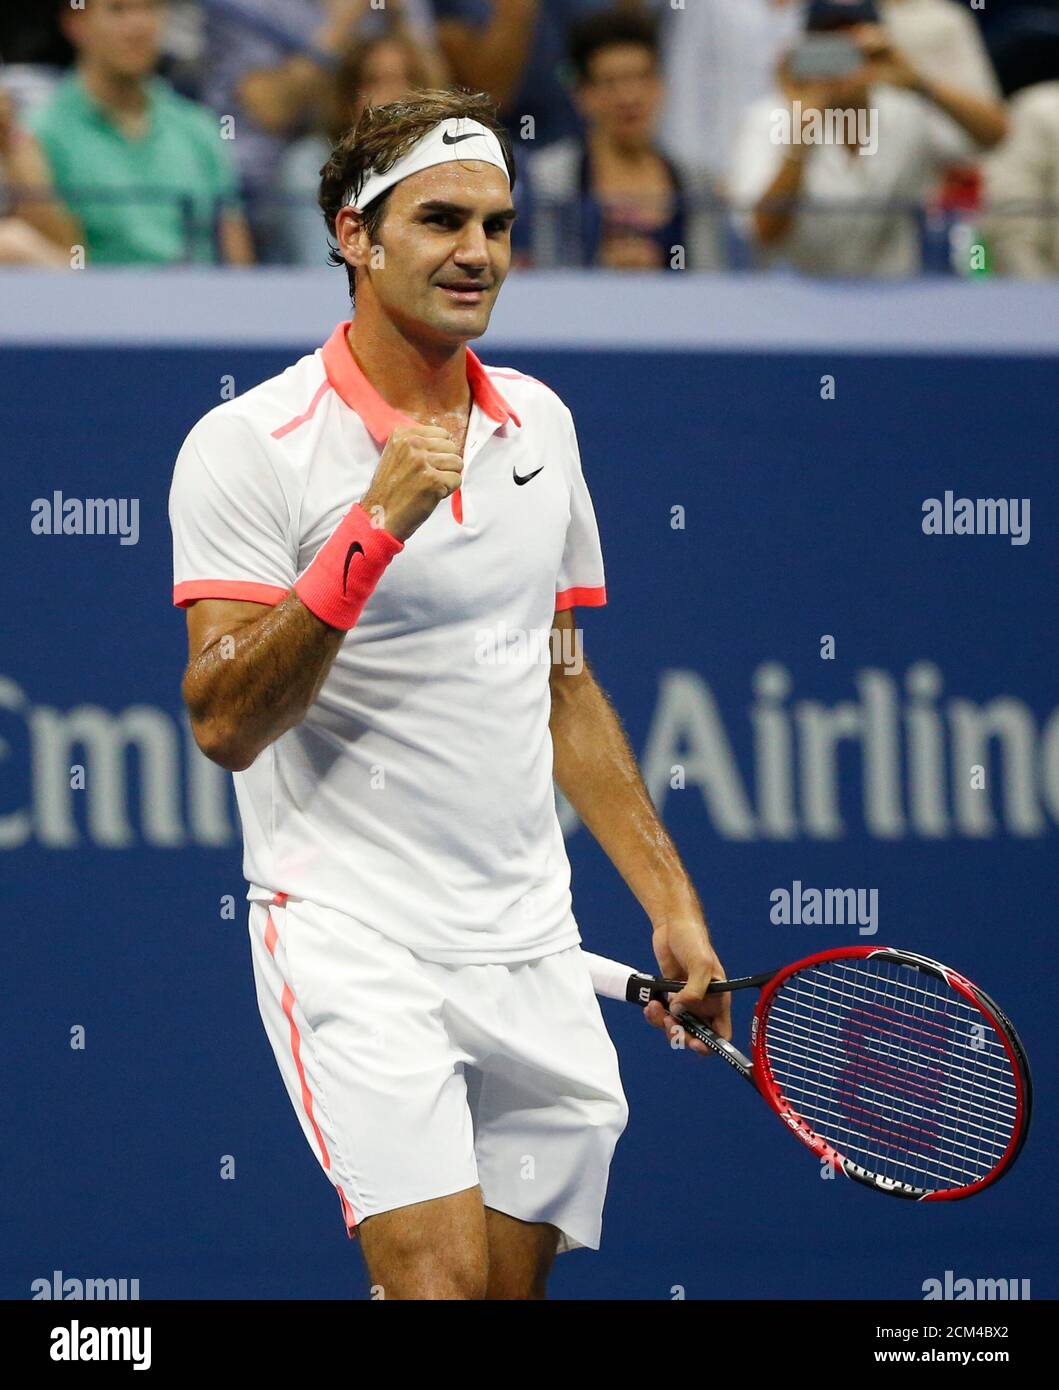 Roger Federer of Switzerland celebrates match point against compatriot Stan  Wawrinka during their men's singles semi-final match at the U.S. Open  Championships tennis tournament in New York, September 11, 2015.  REUTERS/Shannon Stapleton